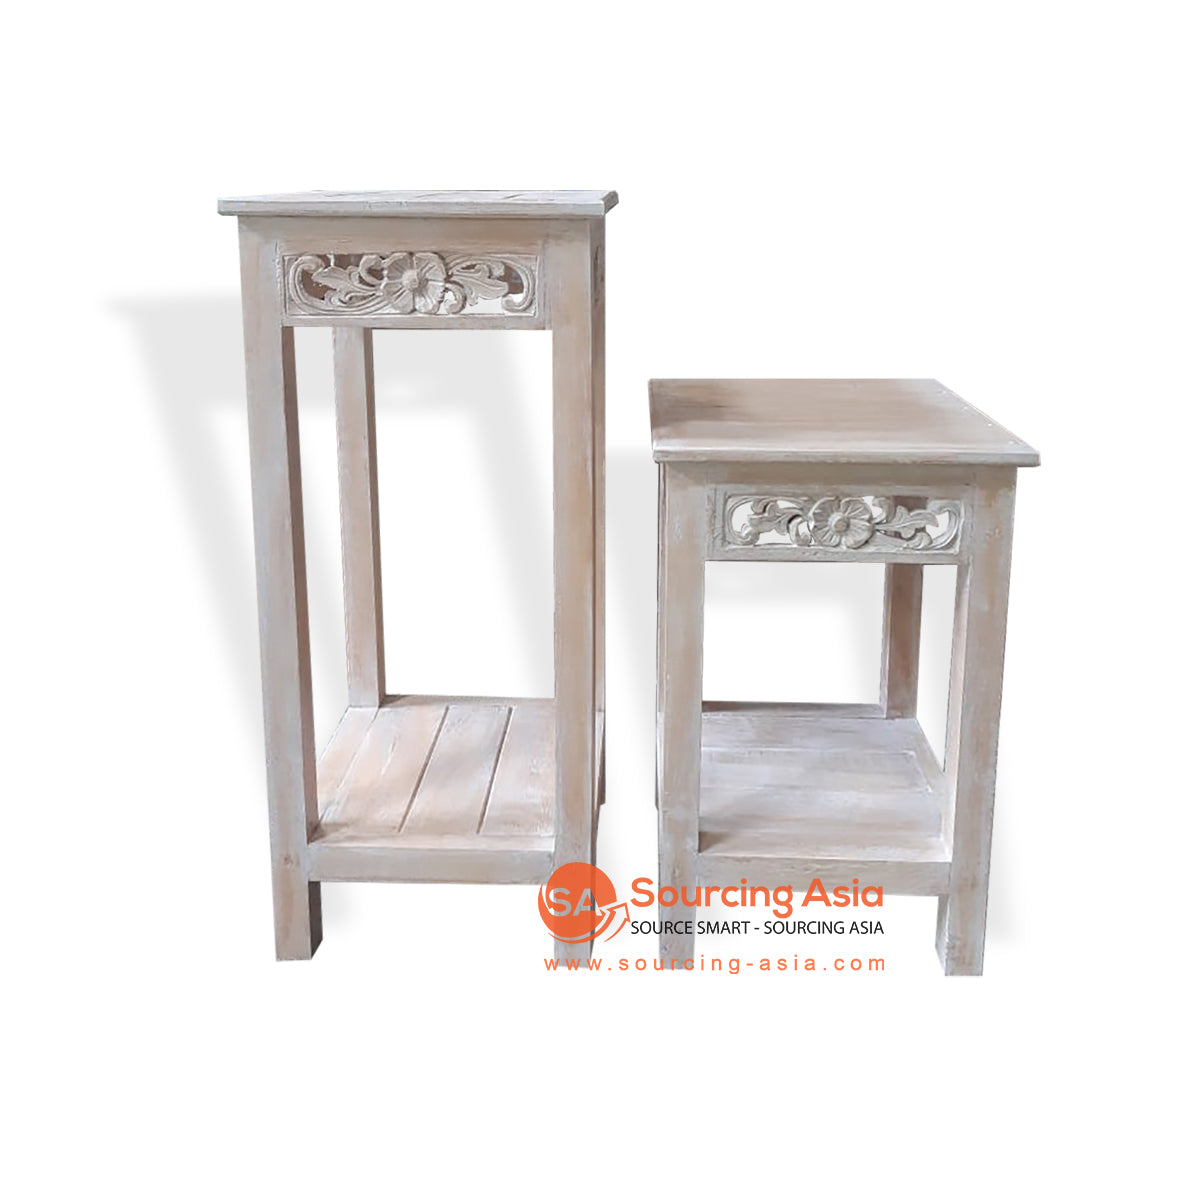 THE007-5 SET OF TWO BROWN WASH WOODEN CONSOLE TABLES